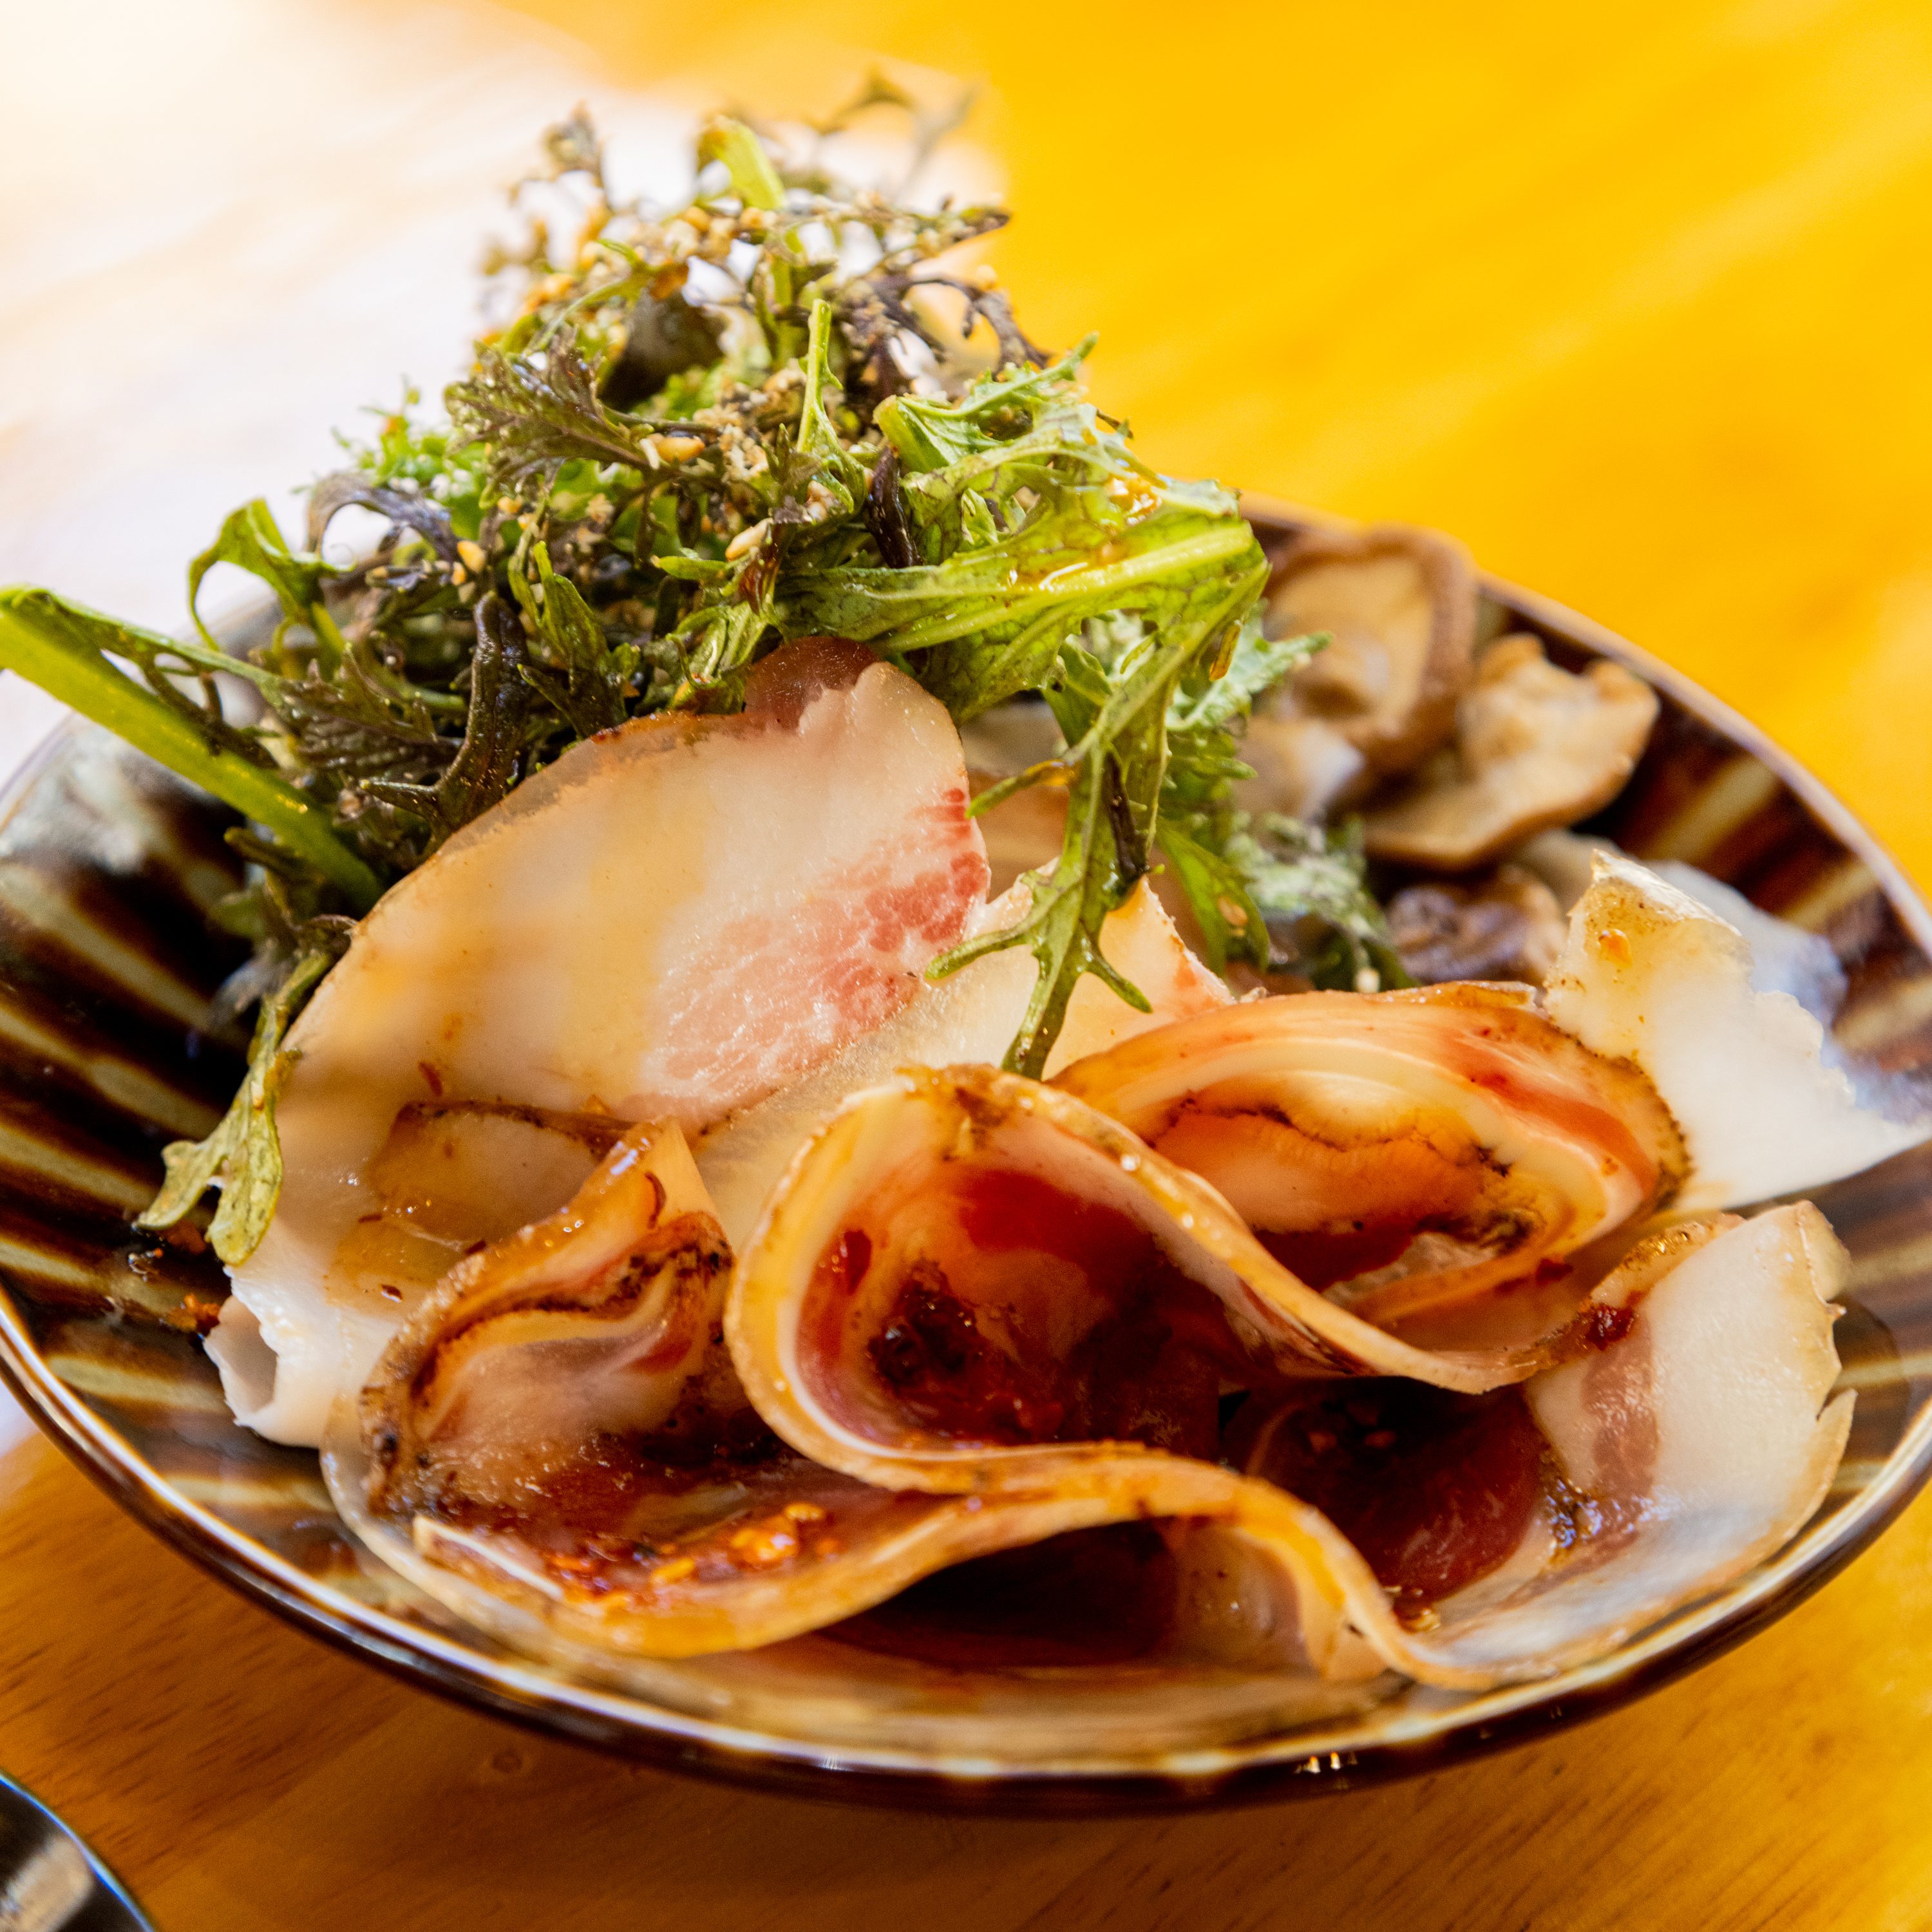 A dish with sliced seafood and green herbs on a brown-striped plate, with vibrant colors on a yellow table.